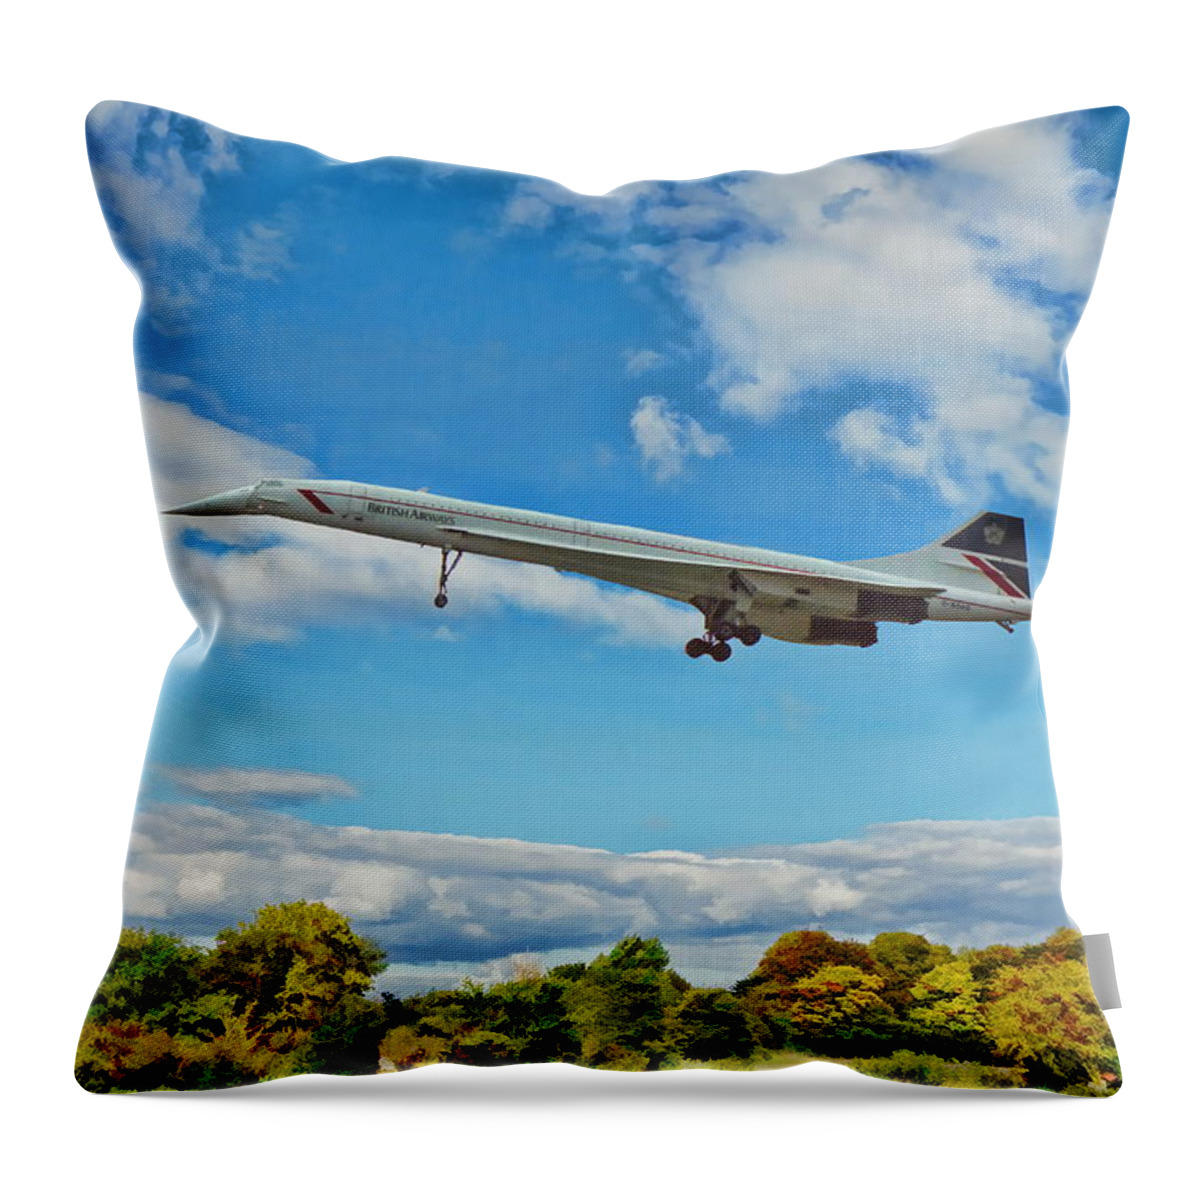 Concorde Throw Pillow featuring the digital art Concorde on Finals by Paul Gulliver